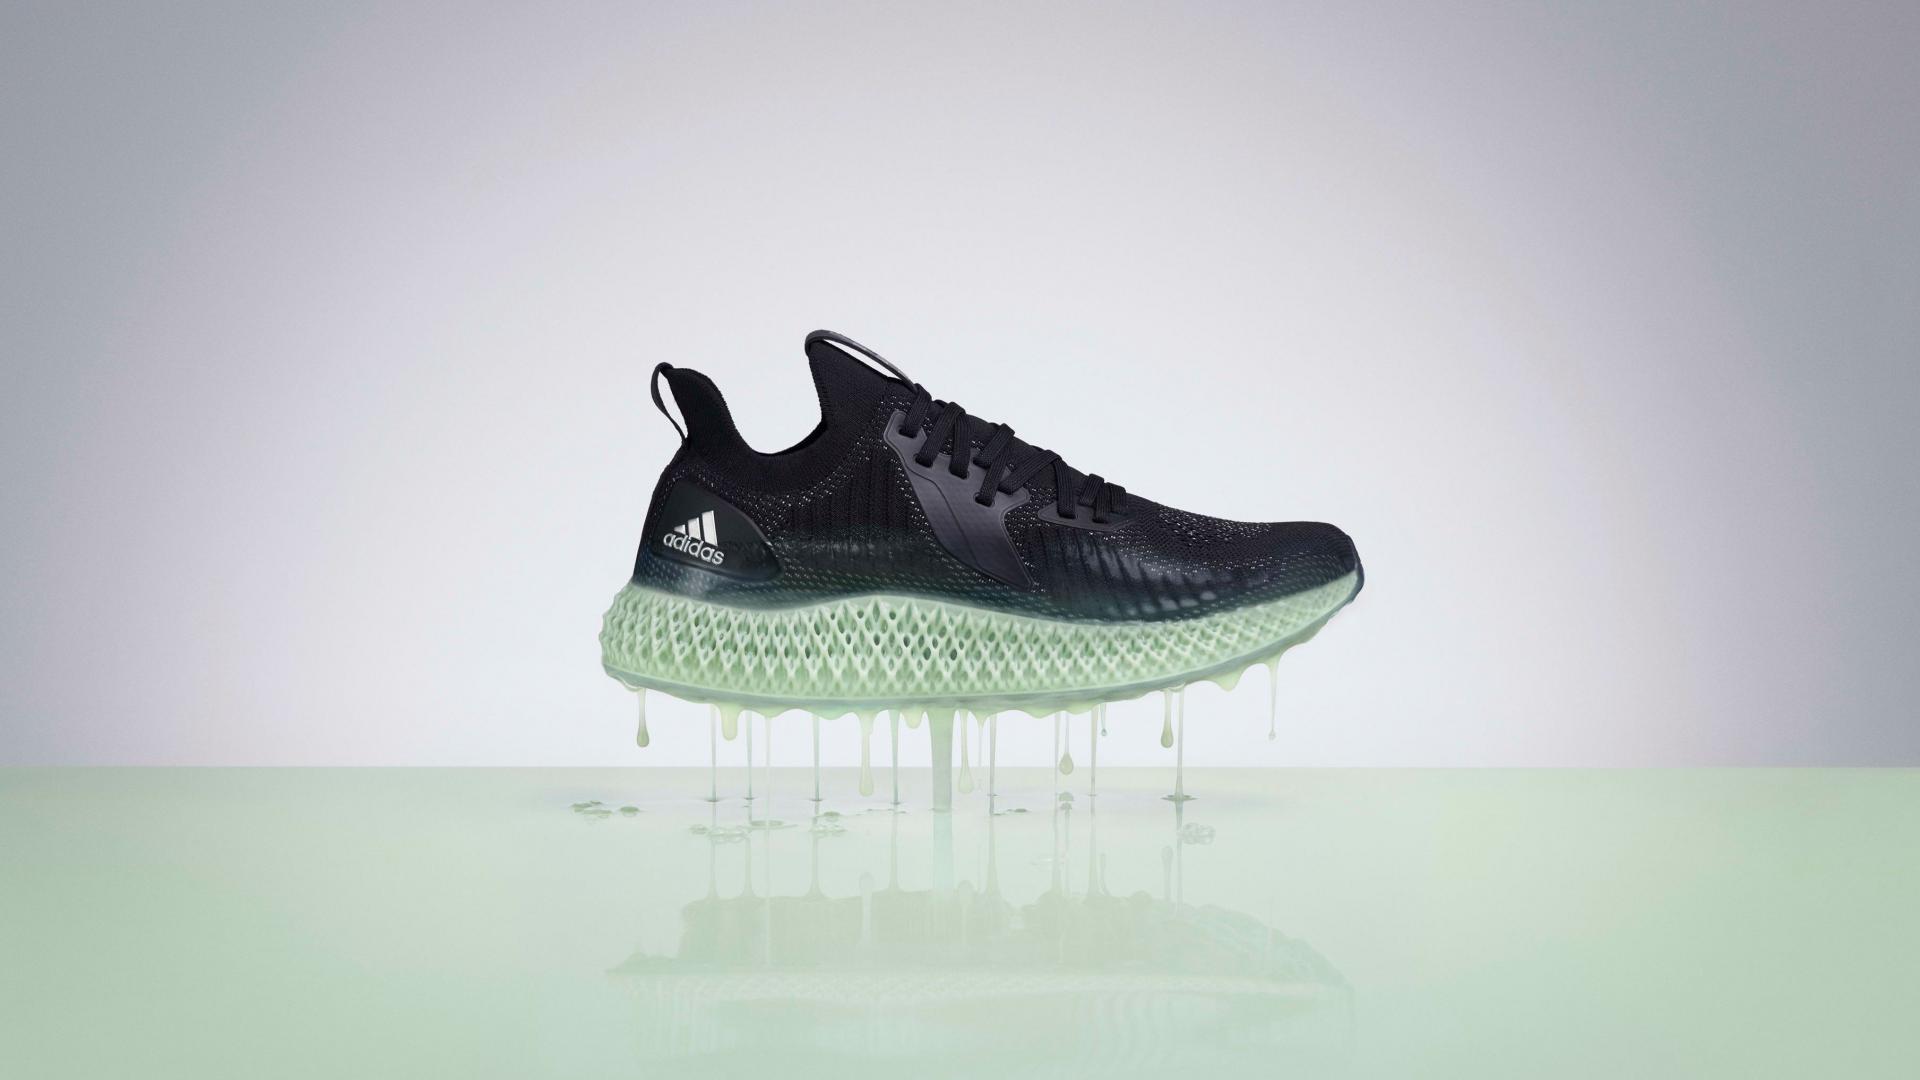 Discover the world in 4D with adidas's 